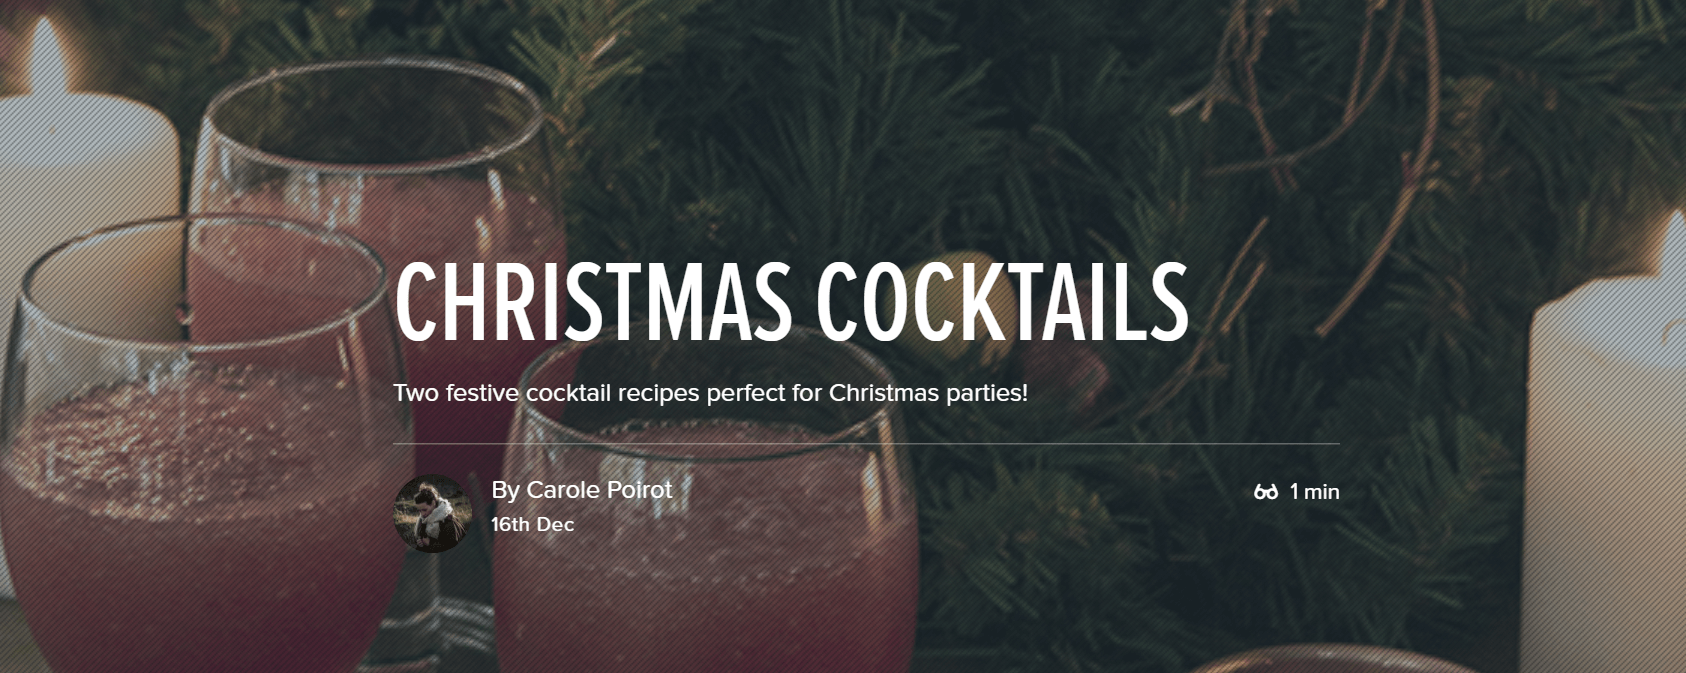 christmas cocktail recipes ecommerce content marketing examples